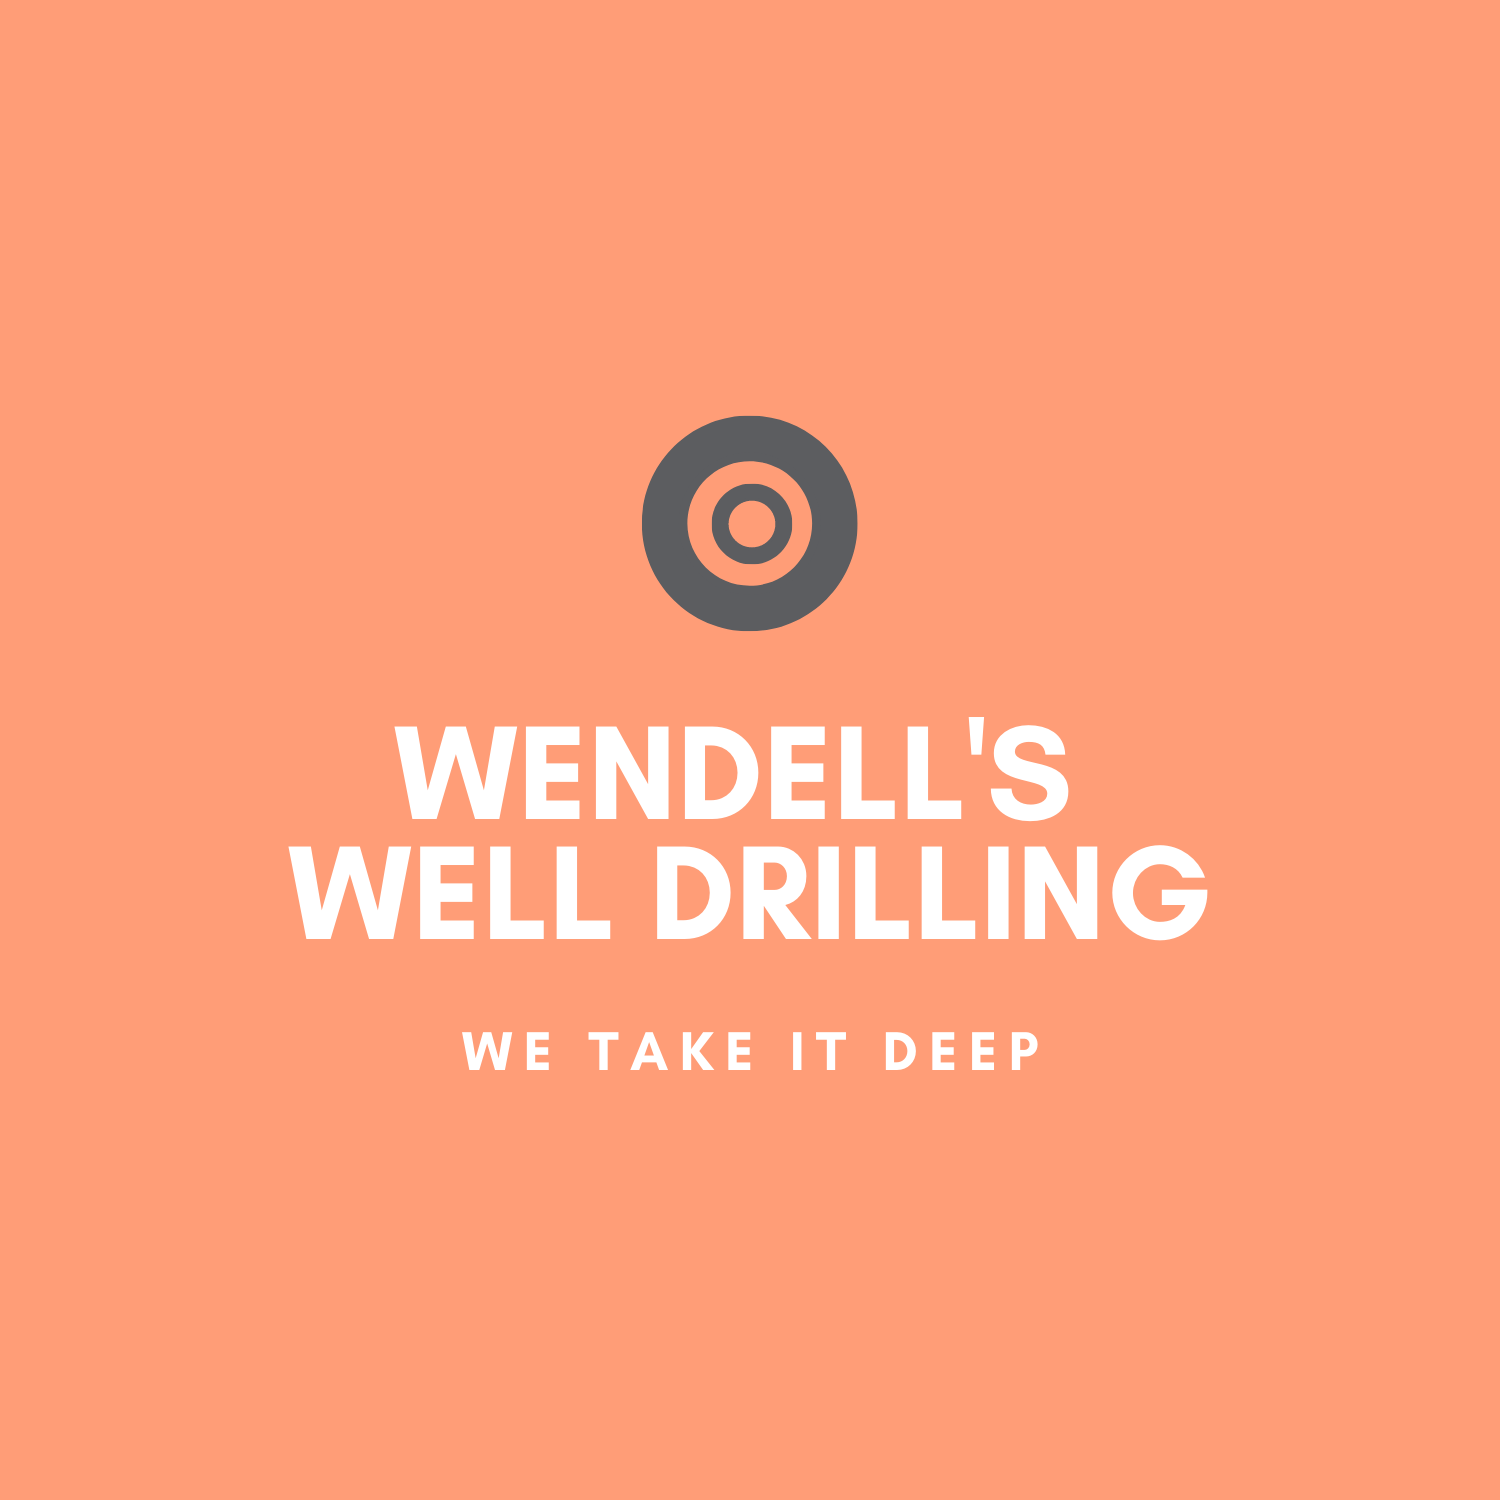 Wendell’s Well Drilling